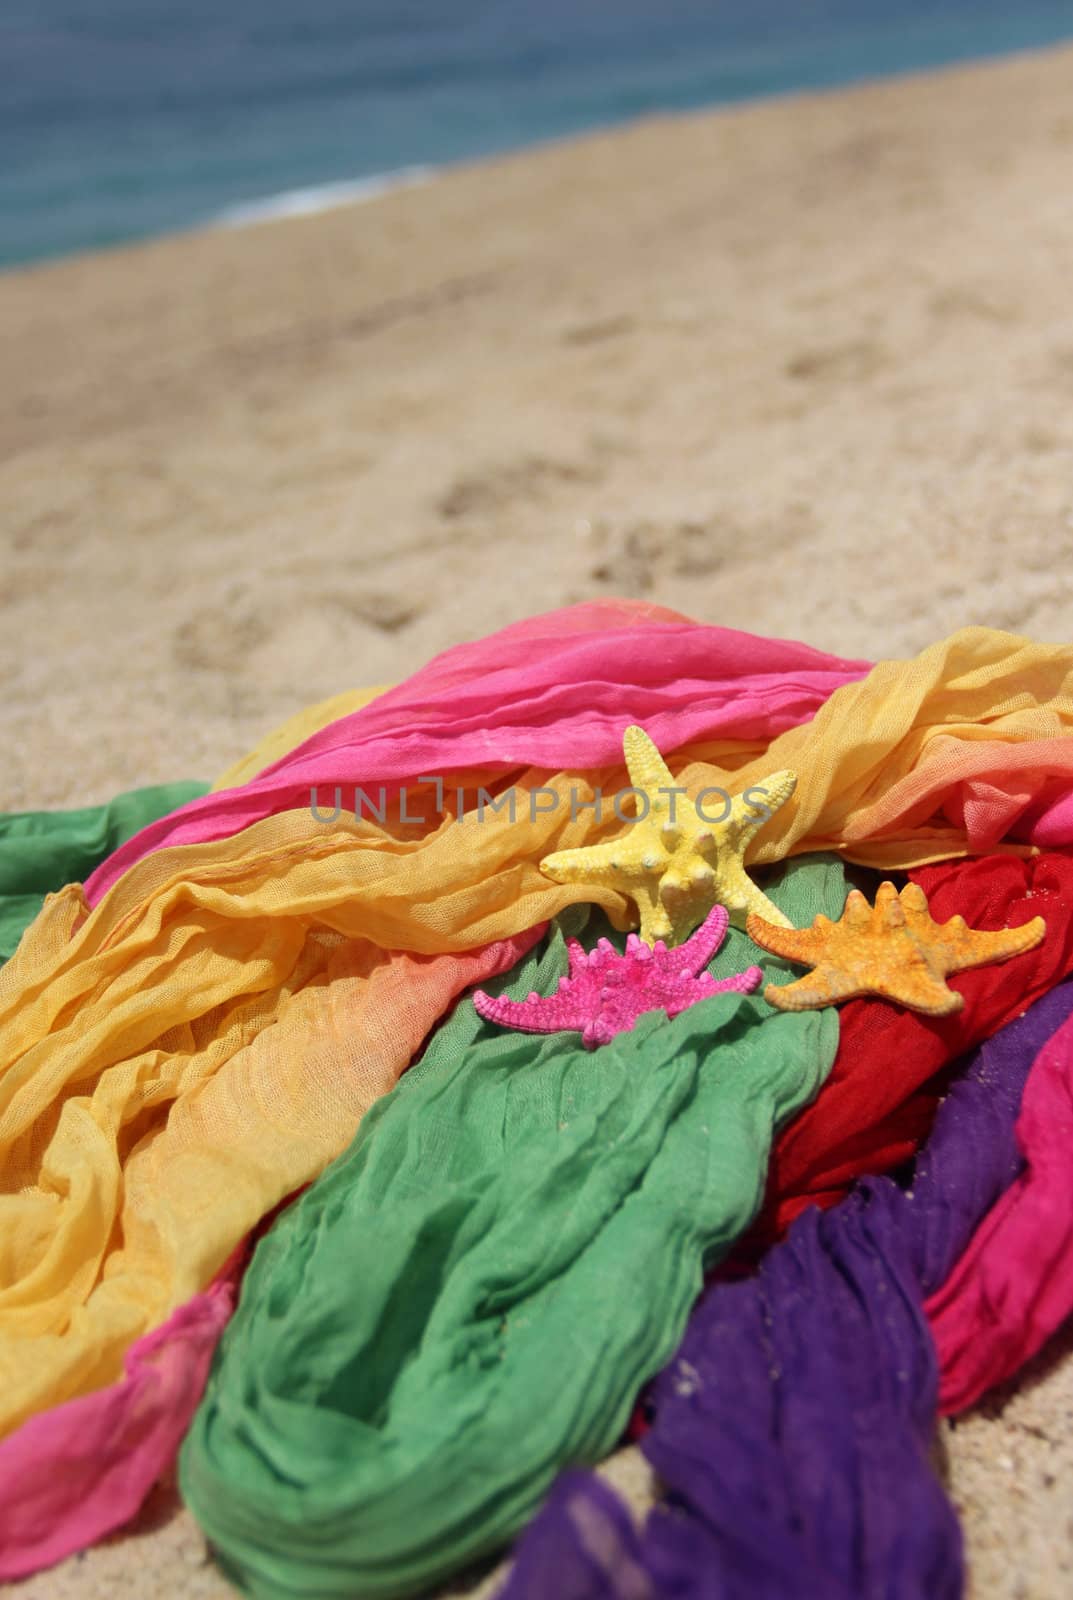 Funny starfishes on the beach and vivid fabrics